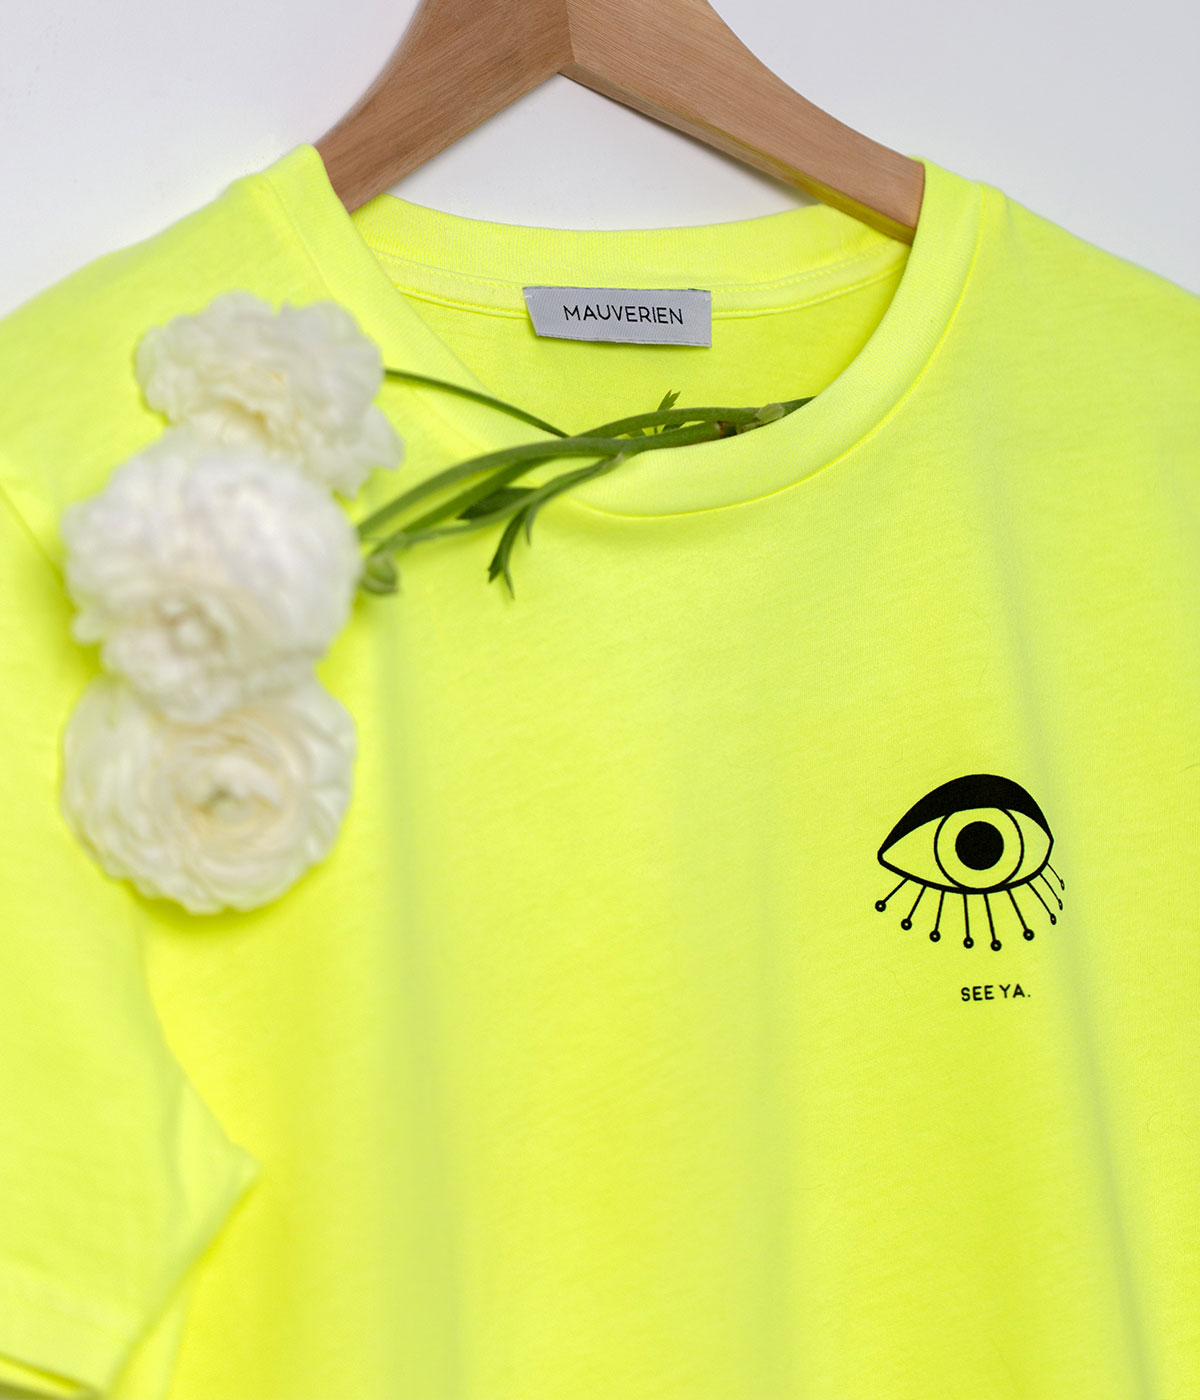 Detail of neon yellow t-shirt with black print of an eye and see ya message.